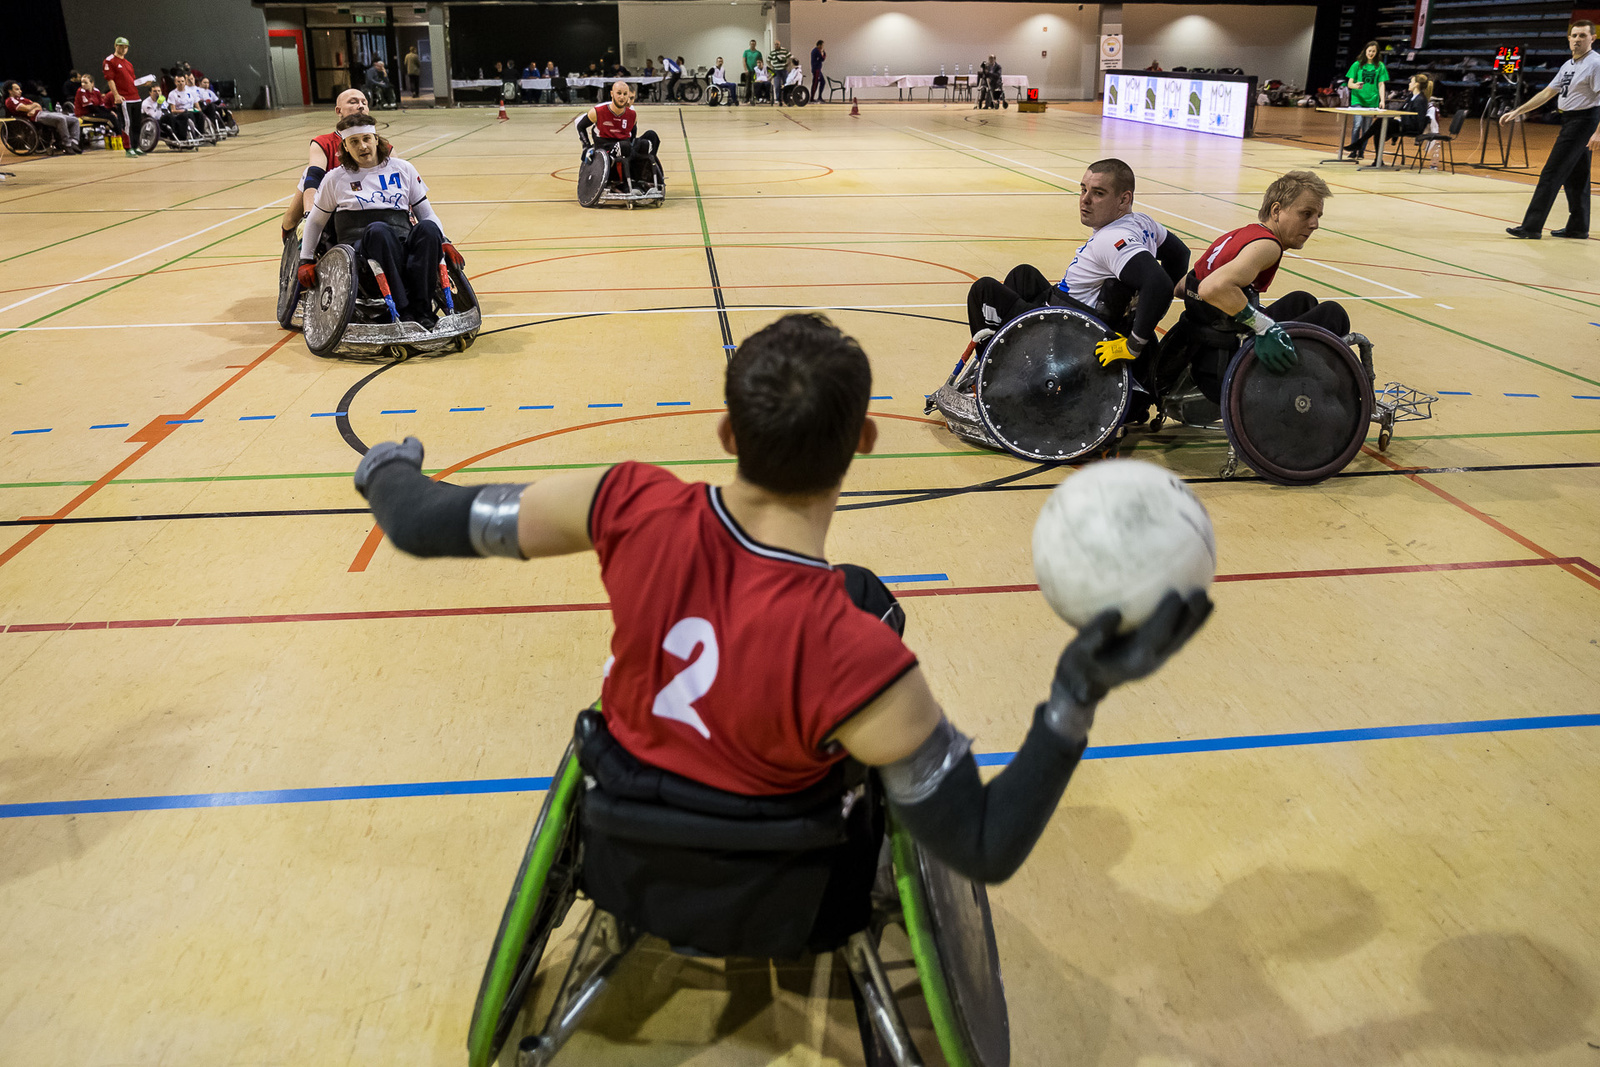 013 14 01 23 wheelchair rugby